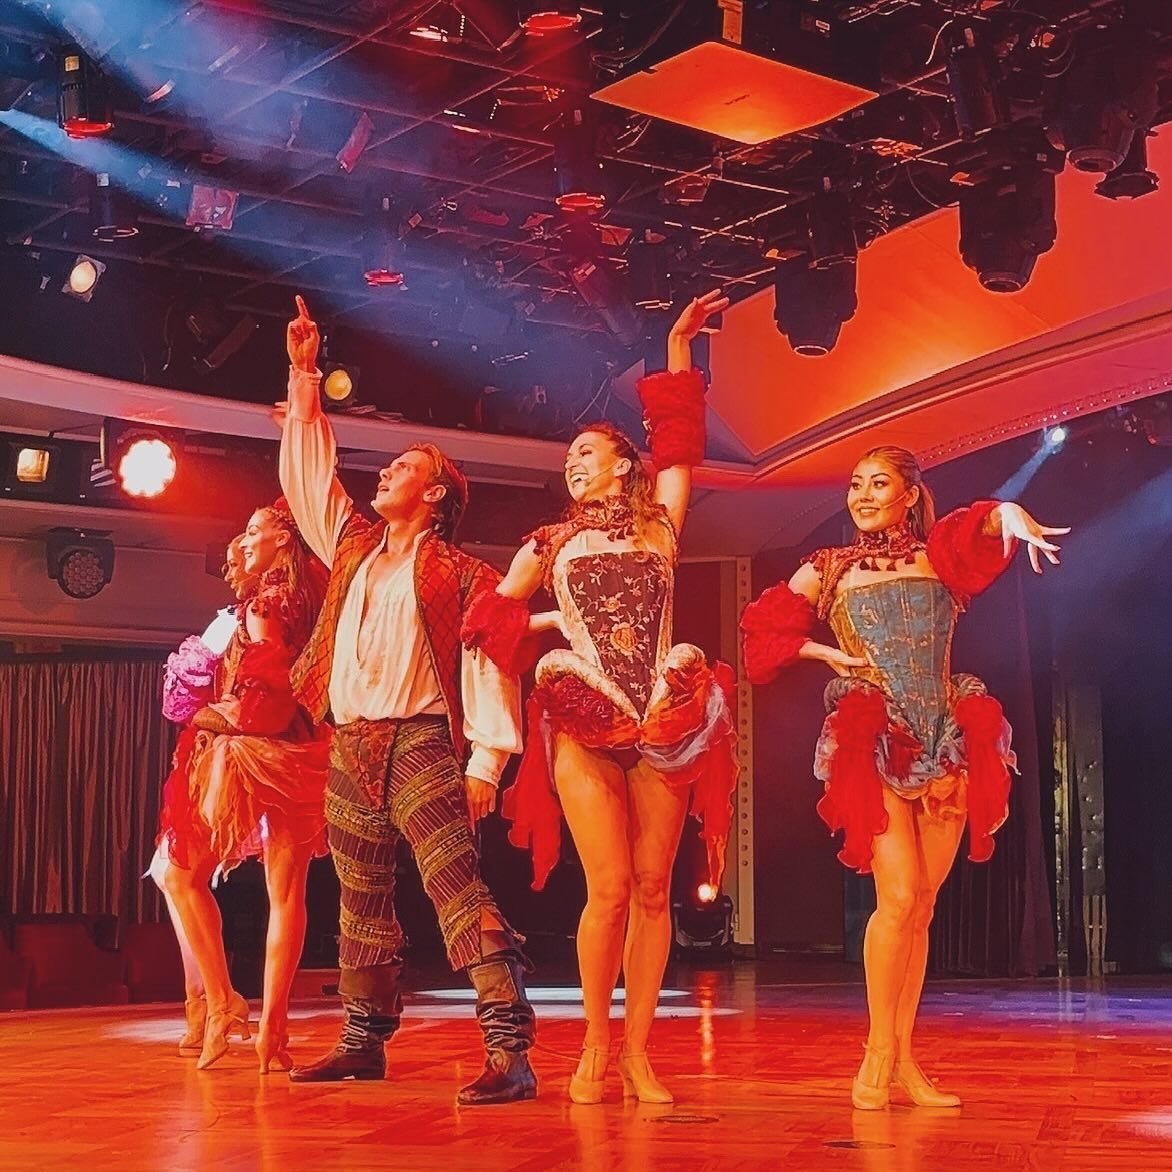 Get a glimpse of T&amp;E&rsquo;s @lachie.wilson lighting up the stage on board @crystalcruises Crystal Symphony! 🛳️ 
So great to see him touring the world, and doing what he does best! 👏🏽
#crystalcruises #crystalsymphony #tandemanagement #tandewor